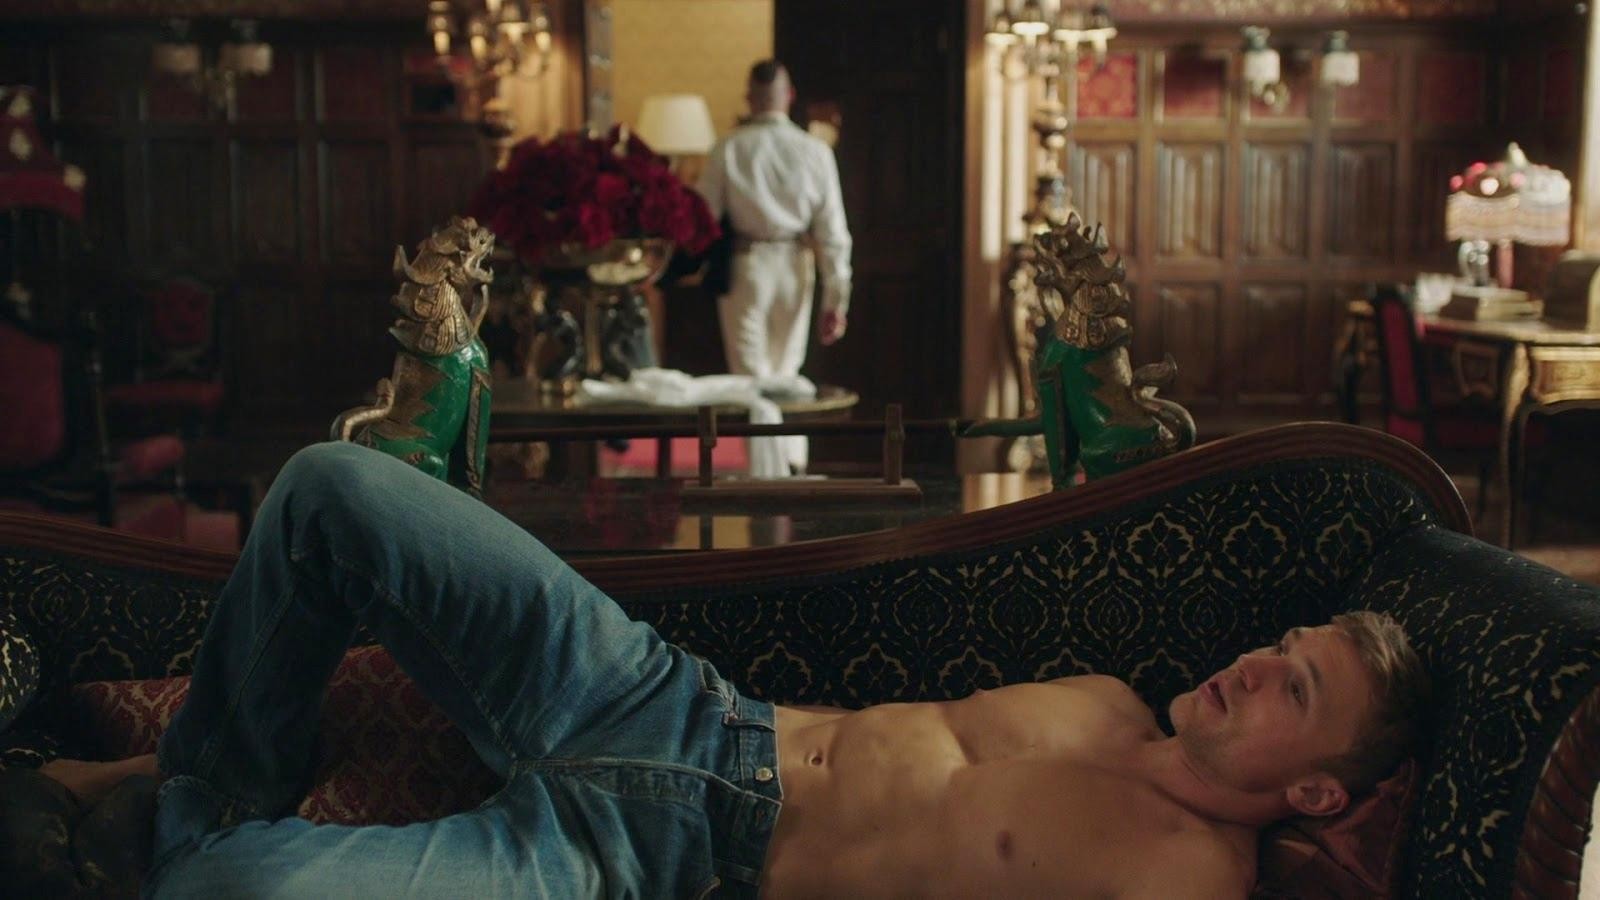 William Moseley in "The Royals" (Ep. 